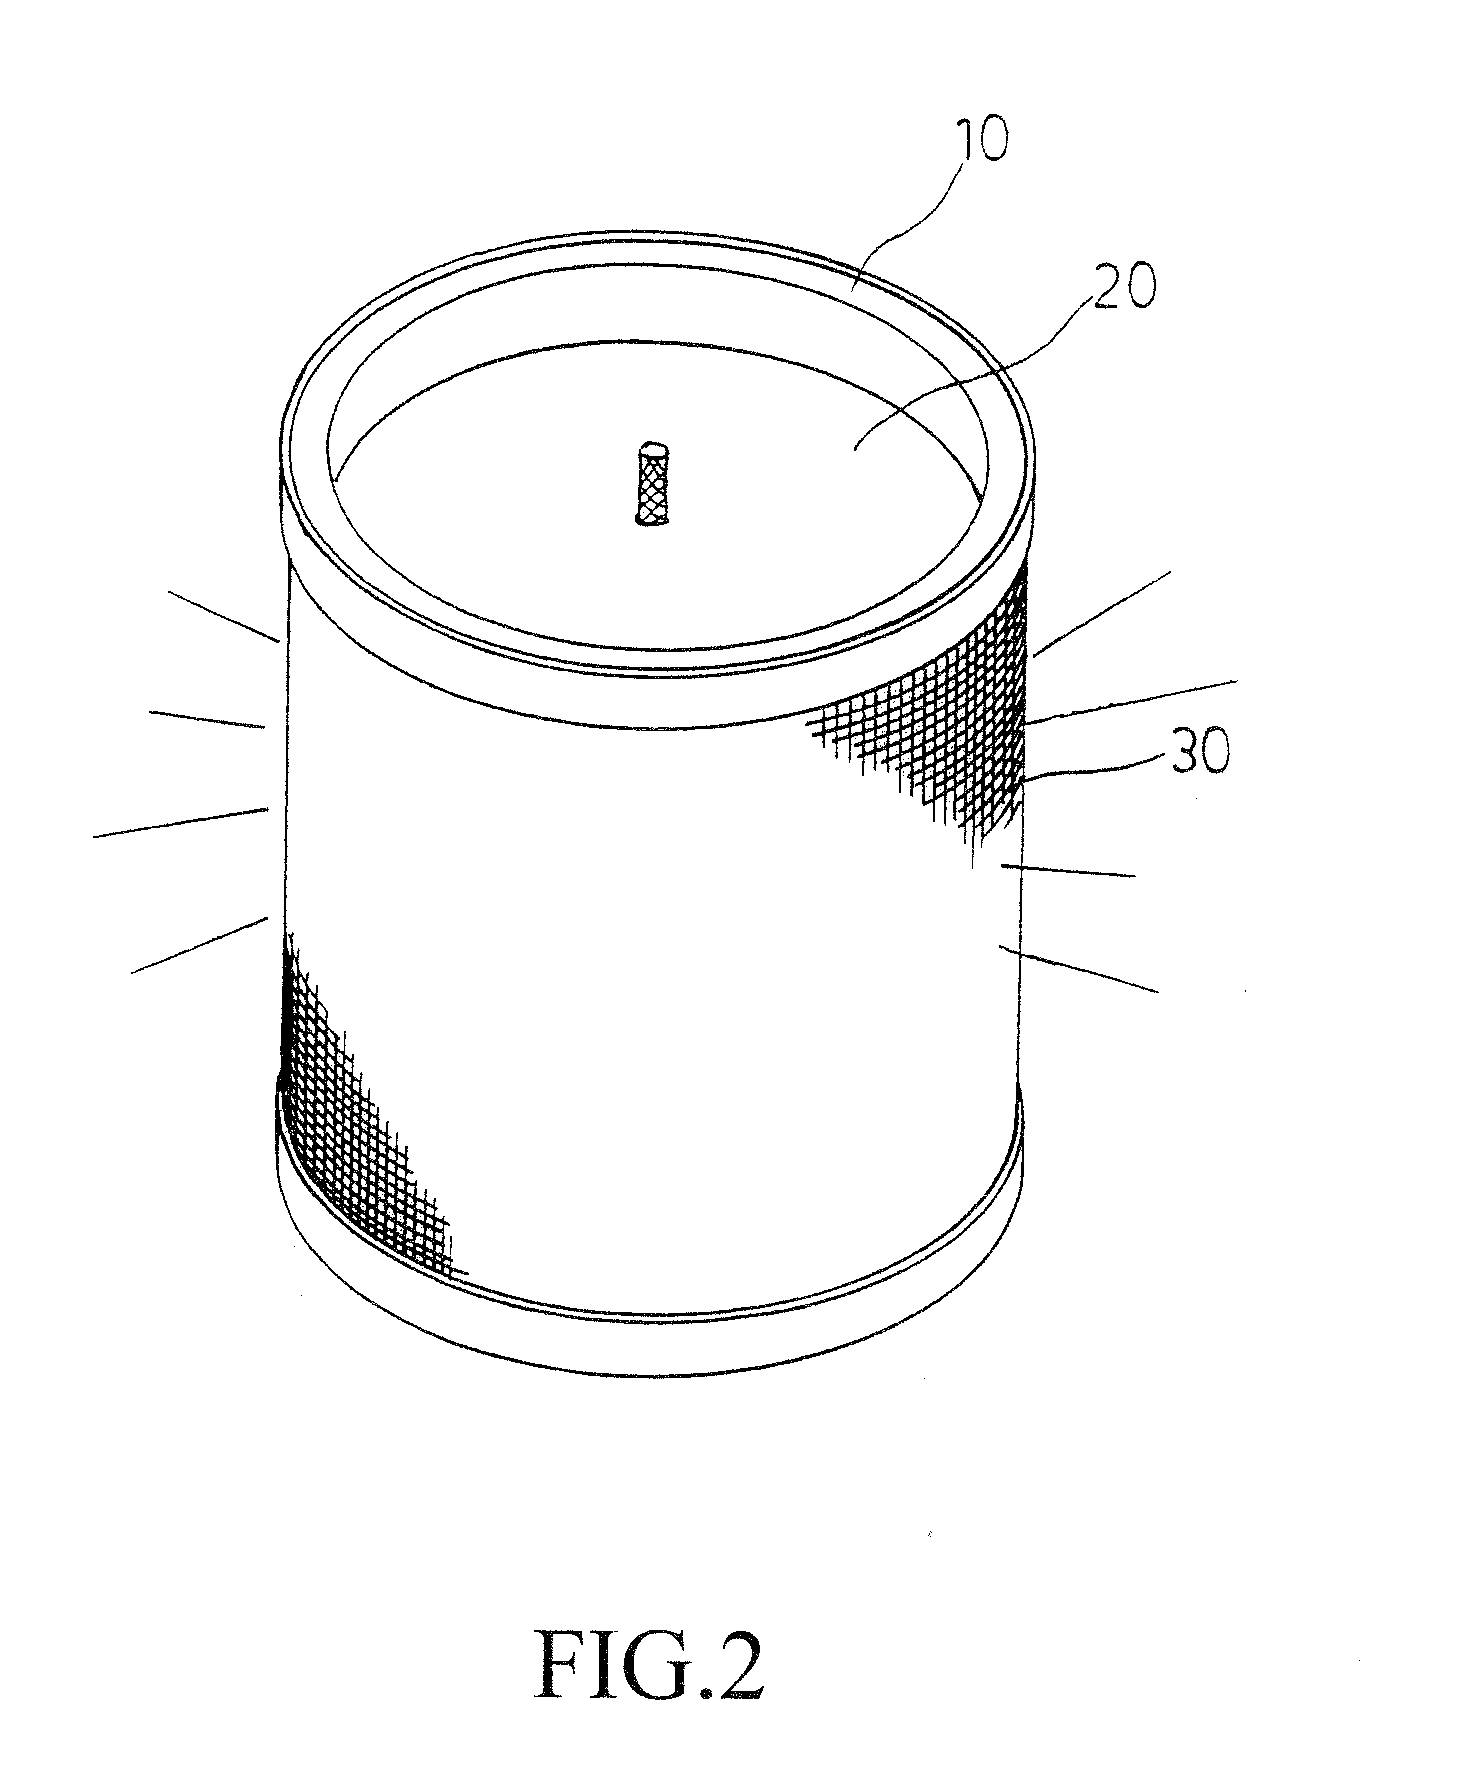 Structure of candle holder